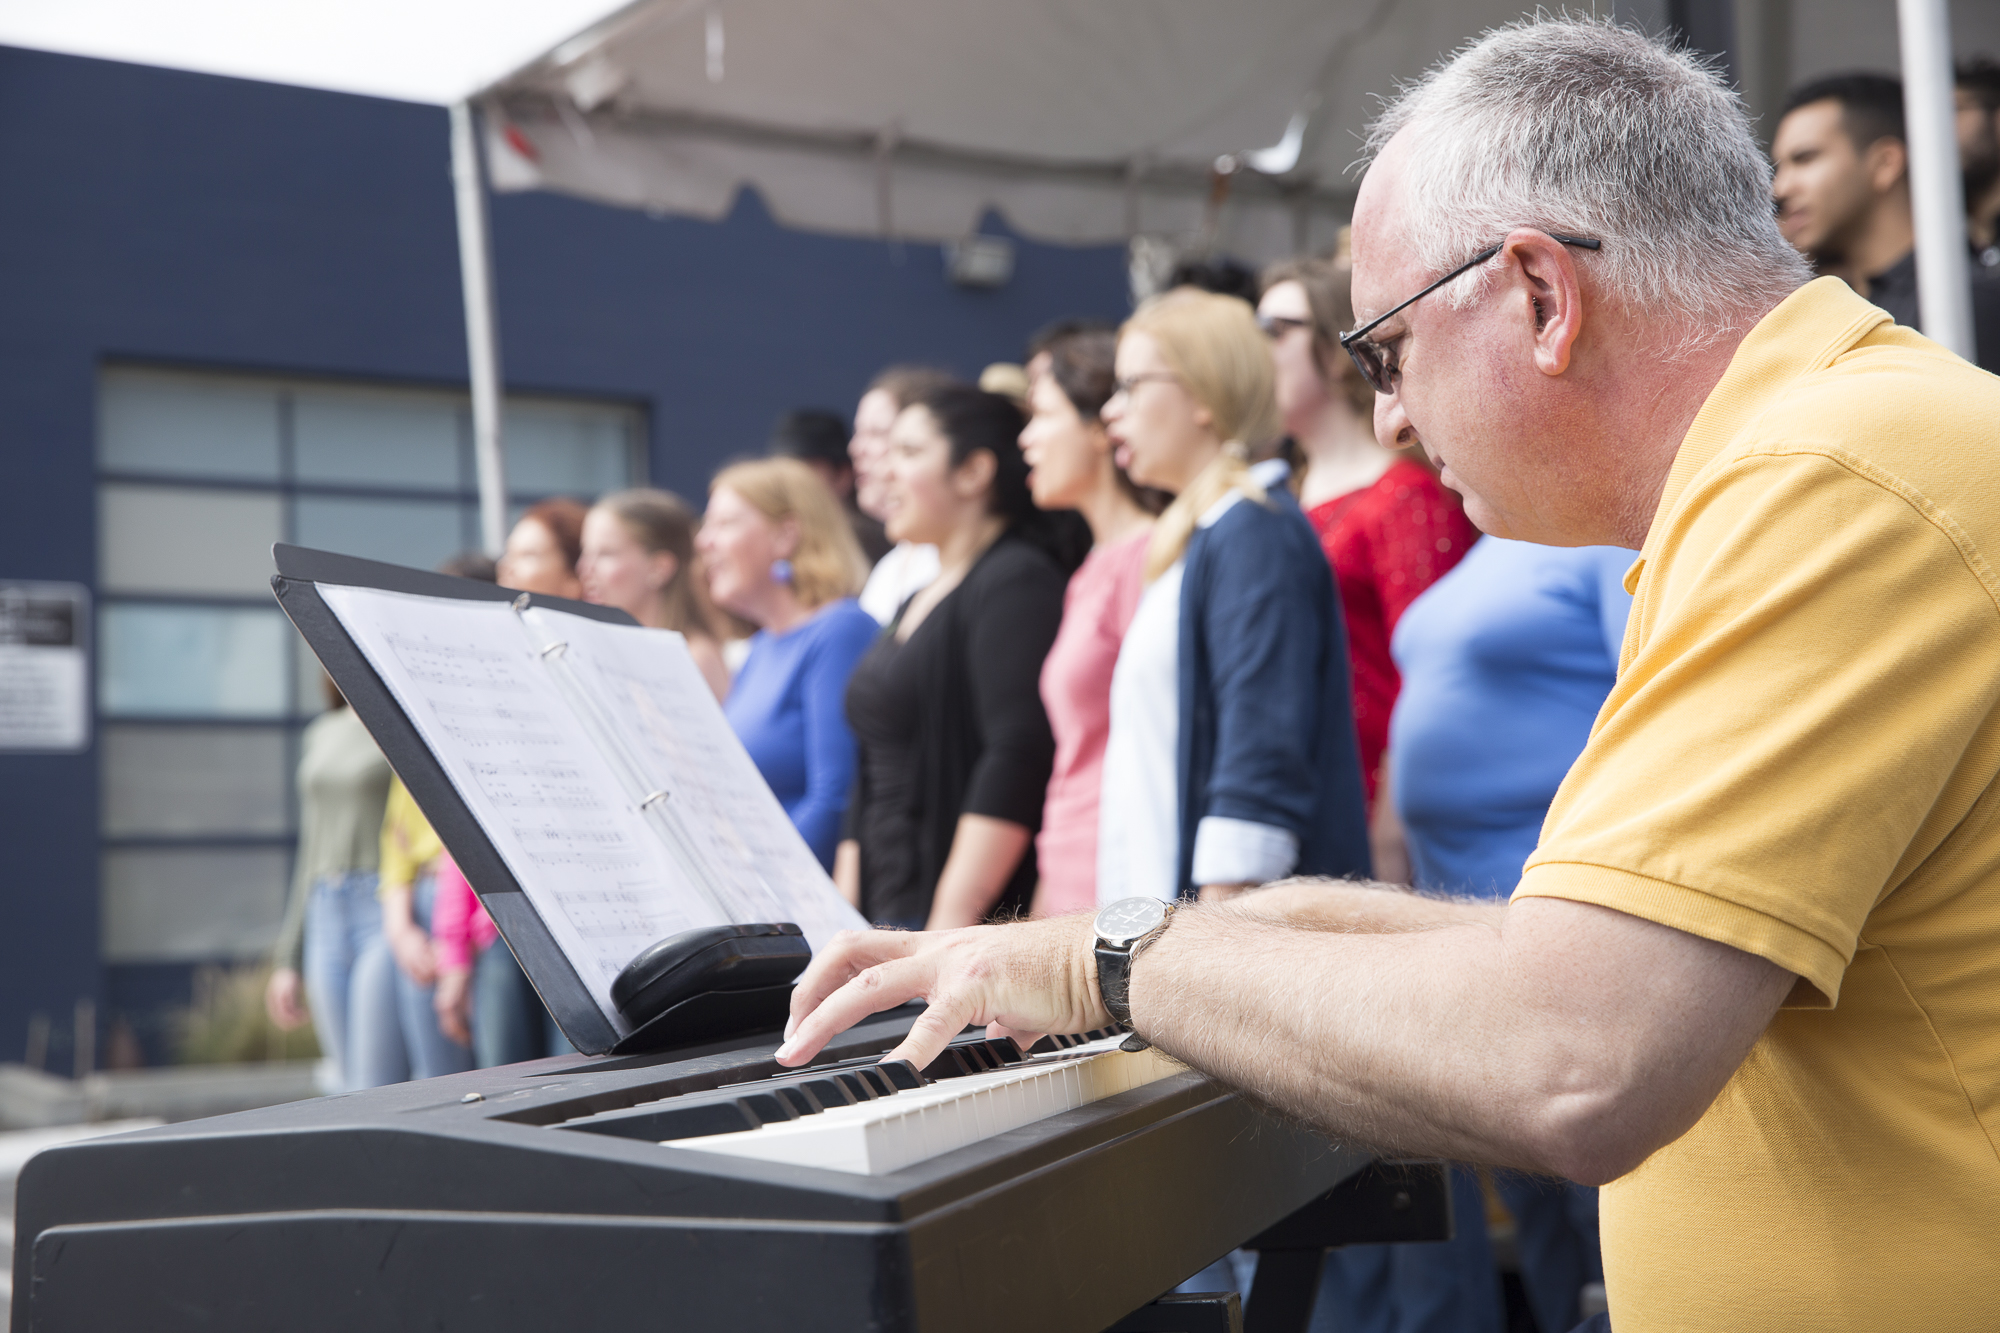  The Santa Monica College Jazz Vocal Ensemble pianist (staff accompanist) Frank Basile (right) plays classic Frank Sinatra songs on the piano during the beginning of the Pico Block Party festivities that took place at the 18th street Arts Center in S